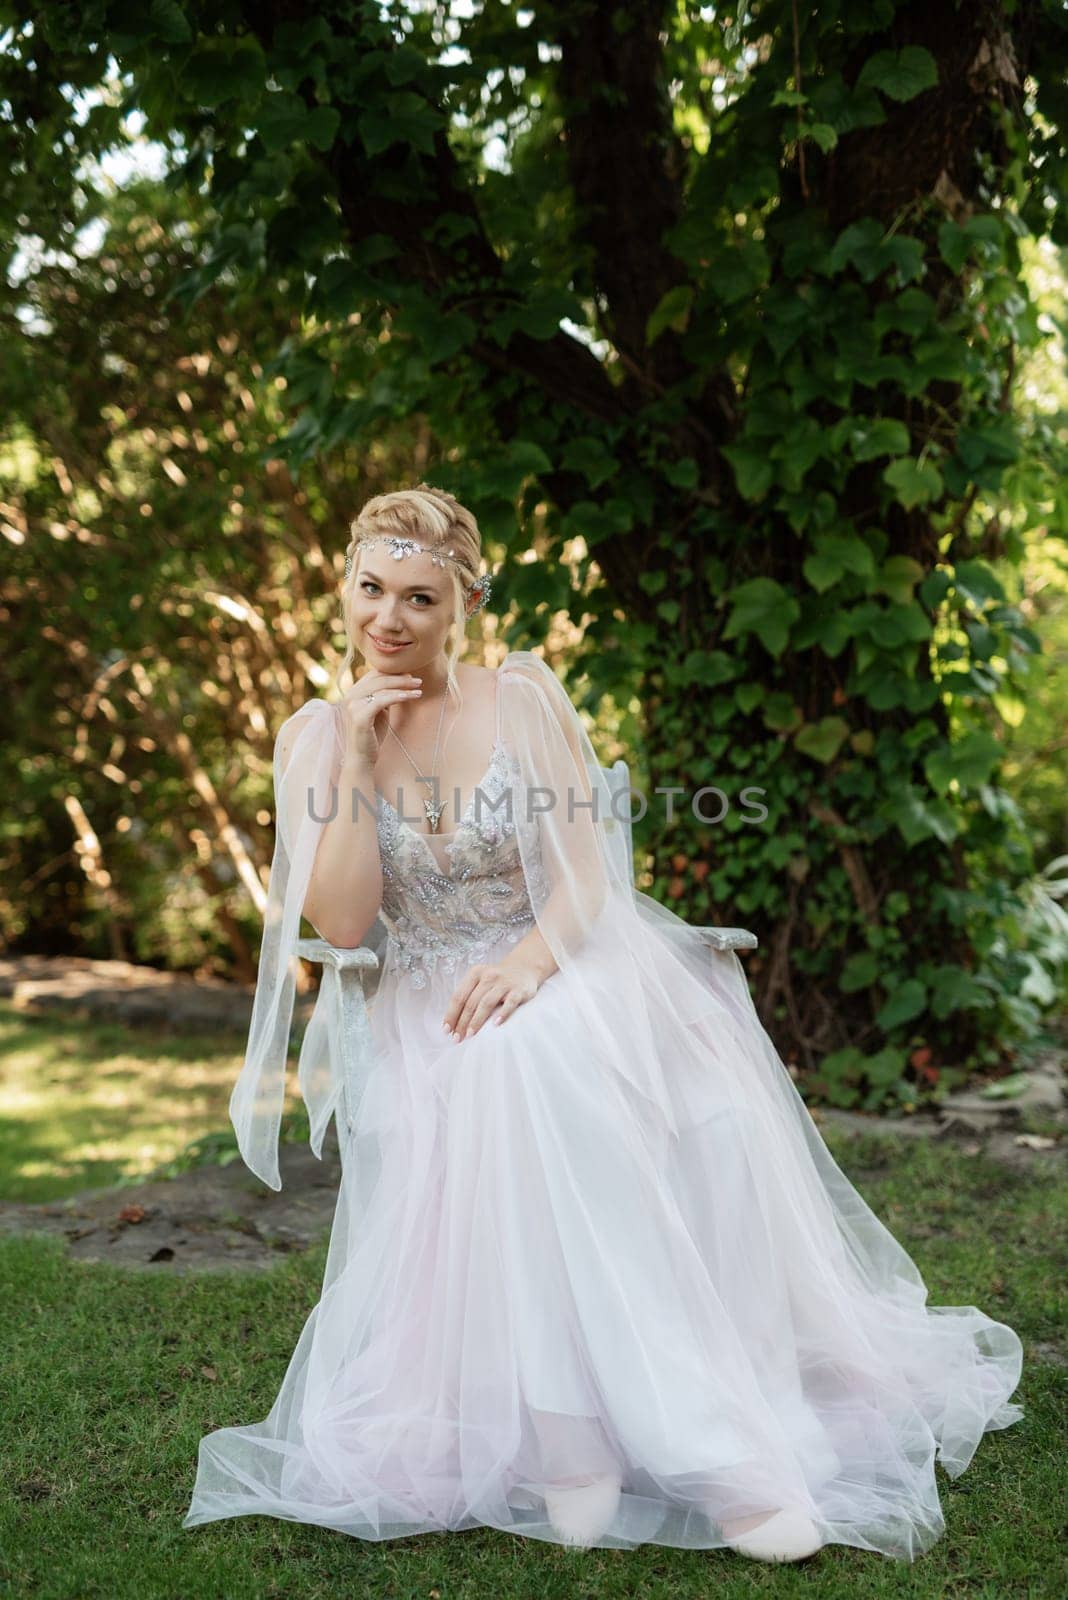 portrait of a happy bride in a light light dress on a green meadow in the park wearing elven accessories